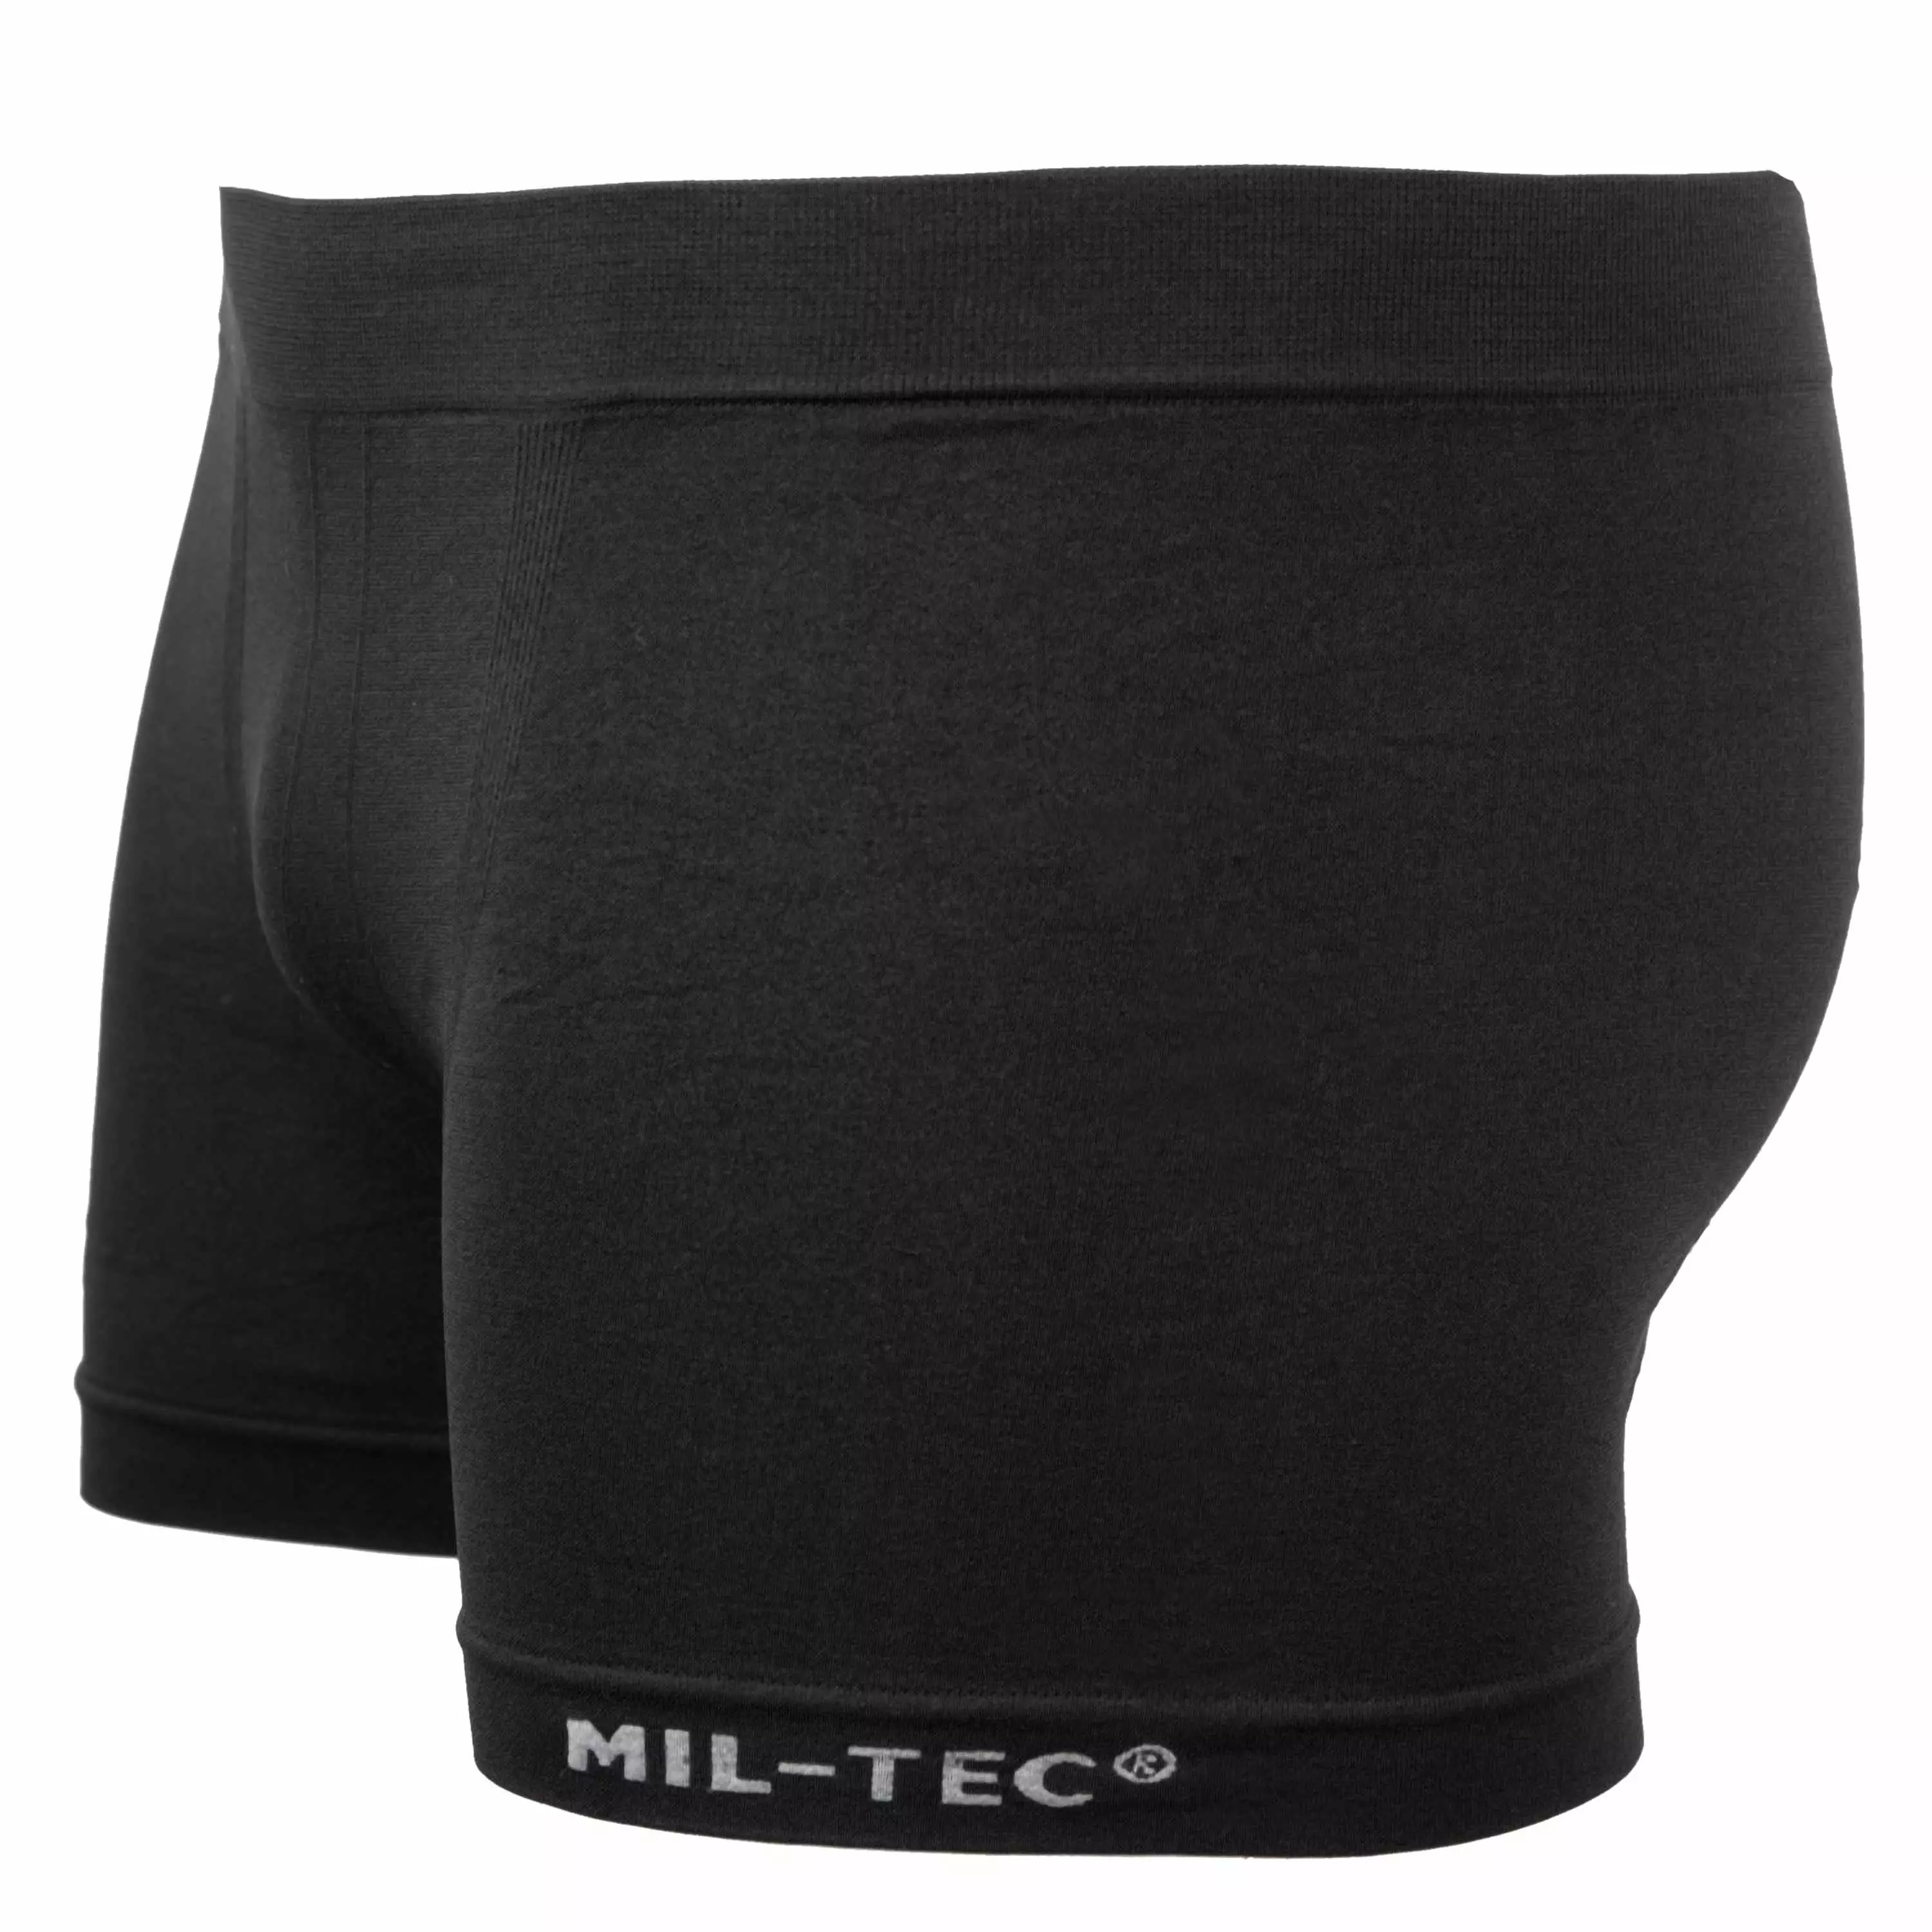 Mil-Tec Boxer Shorts Olive size S at  Men's Clothing store